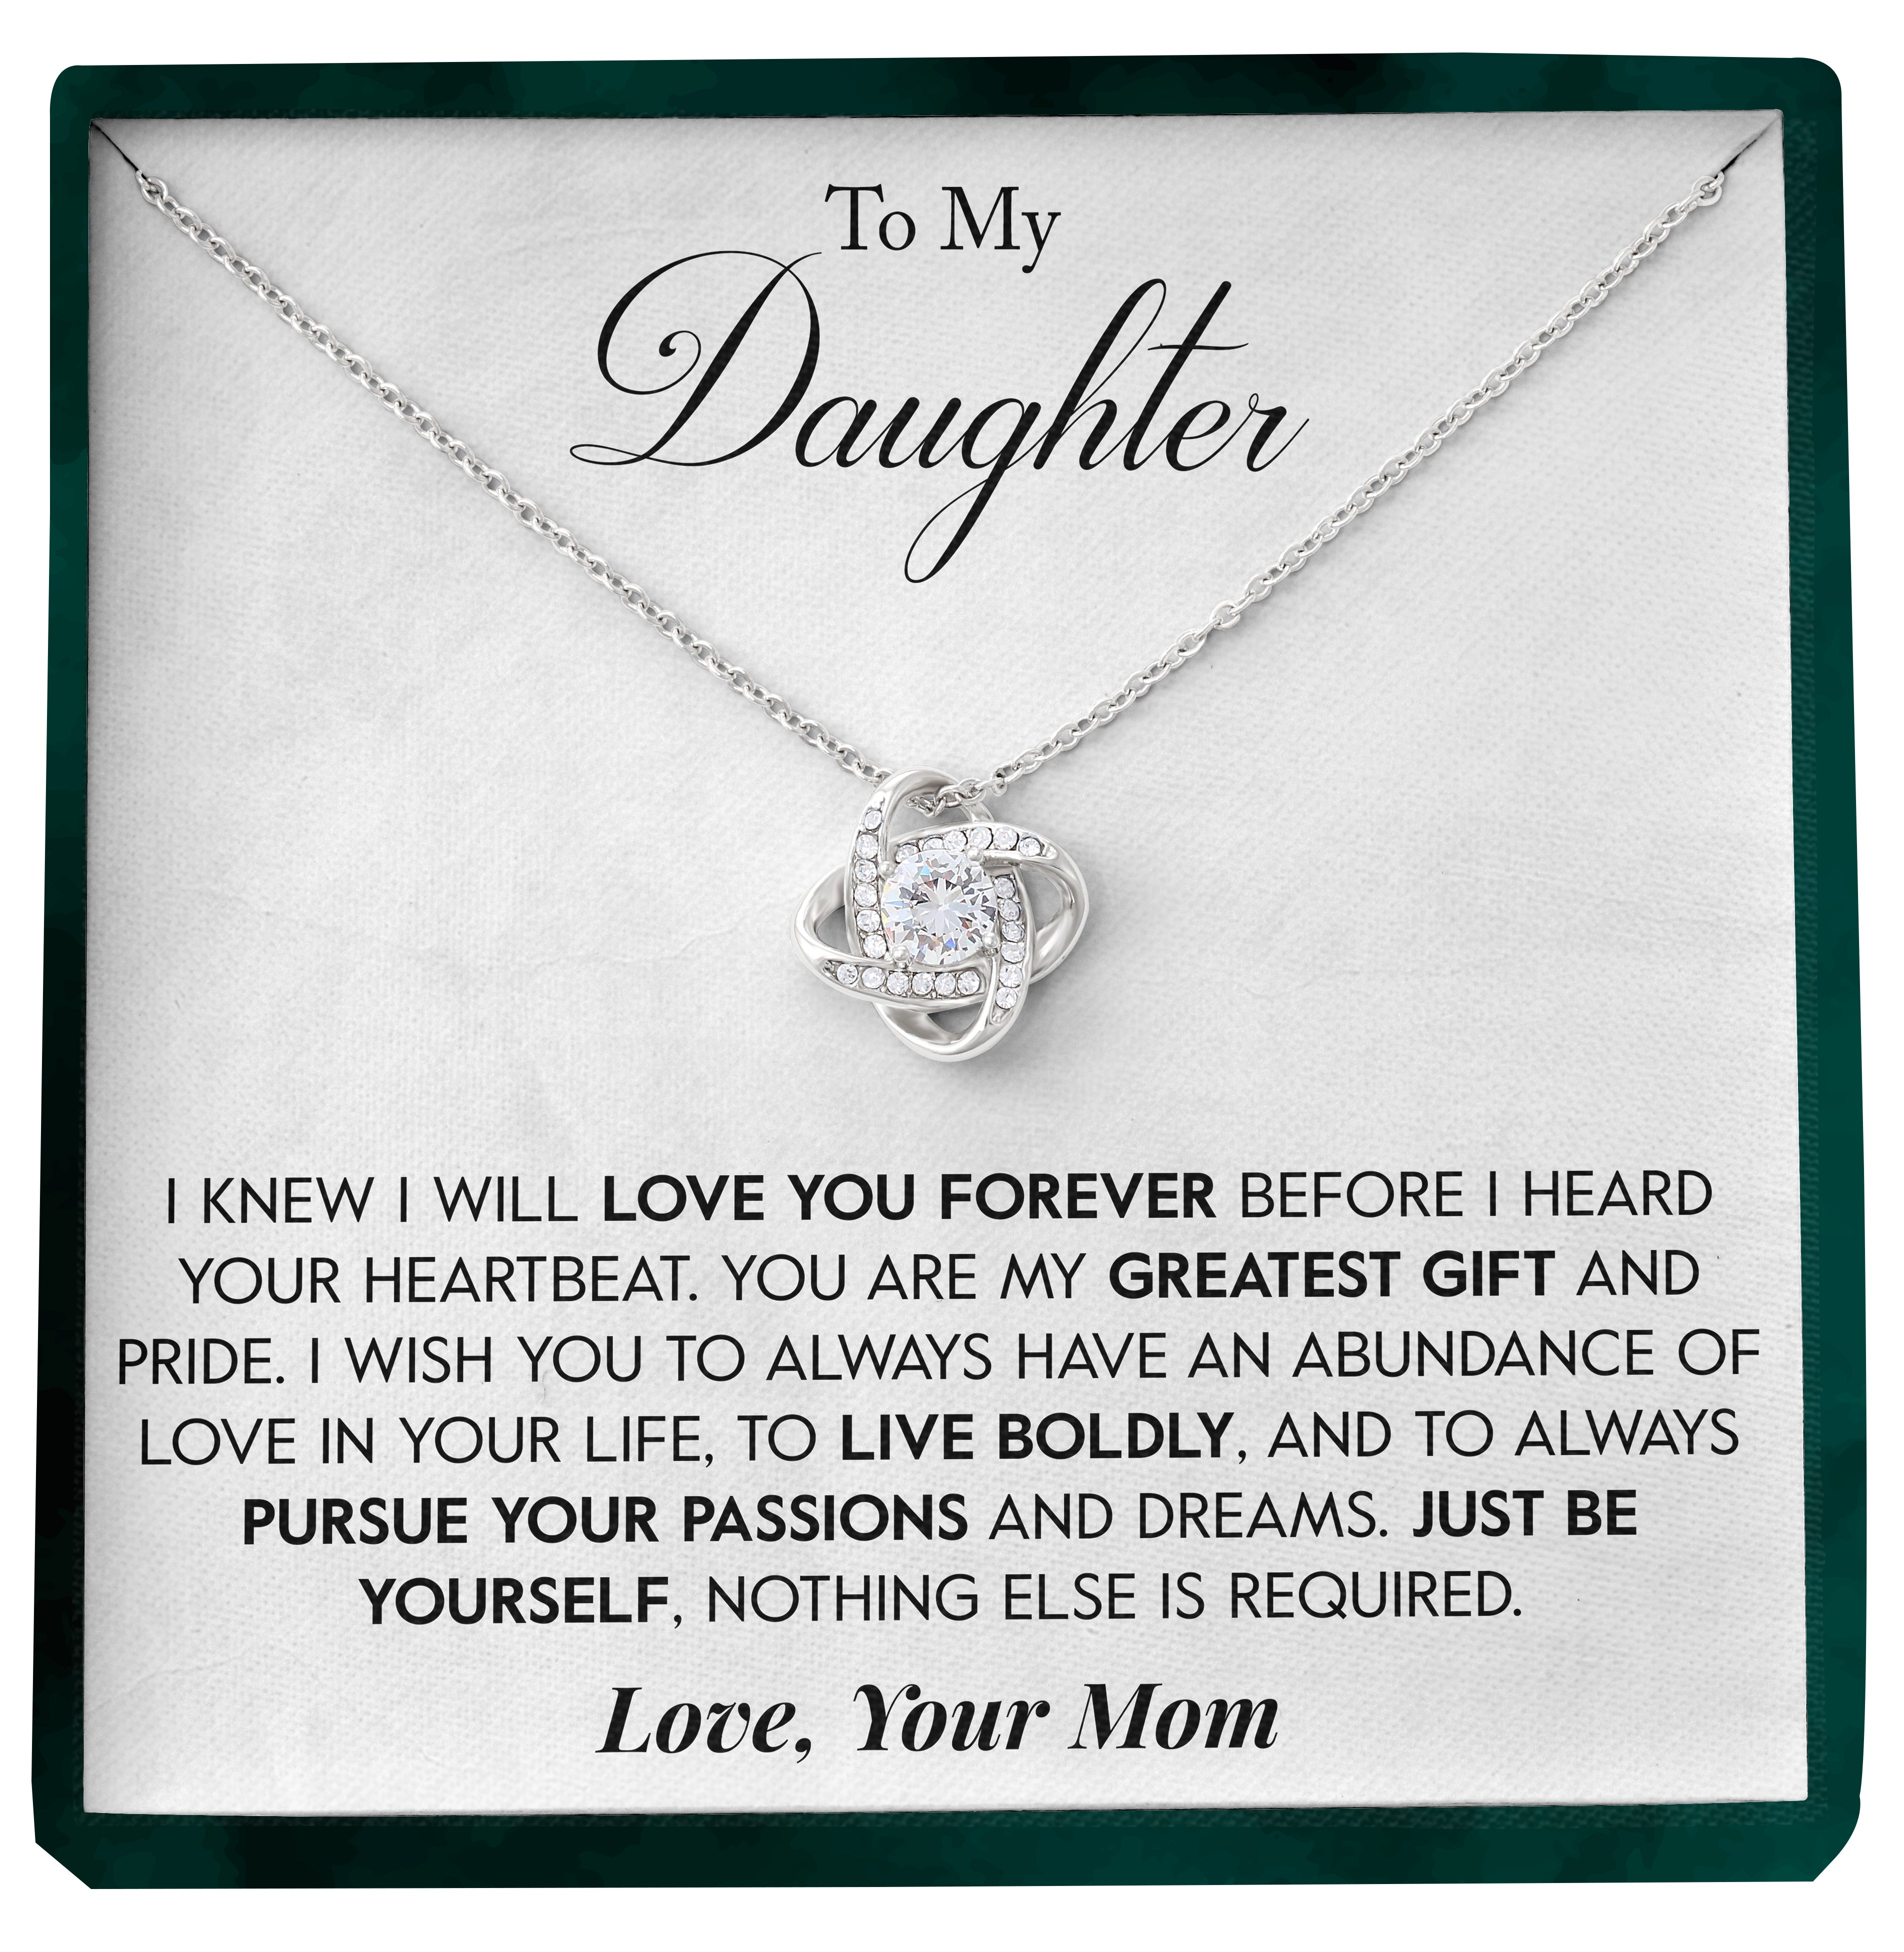 To My Daughter | "My Greatest Gift" | Love Knot Necklace